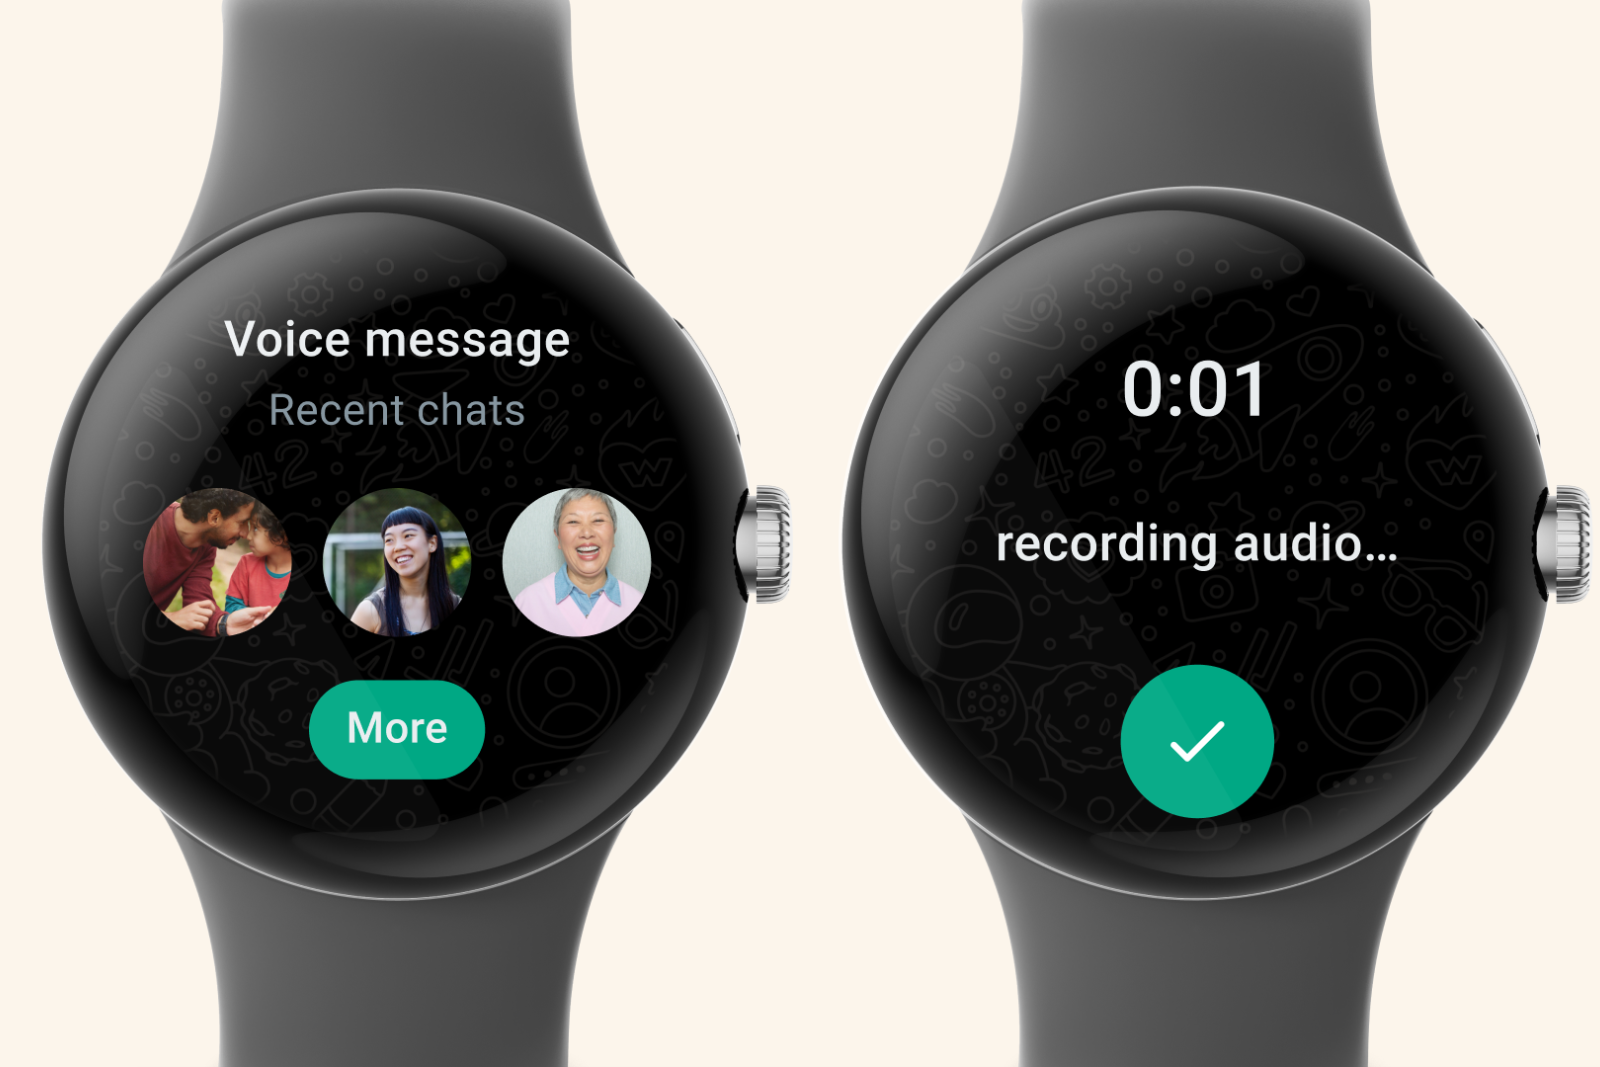 How to use WhatsApp on your Wear OS smartwatch